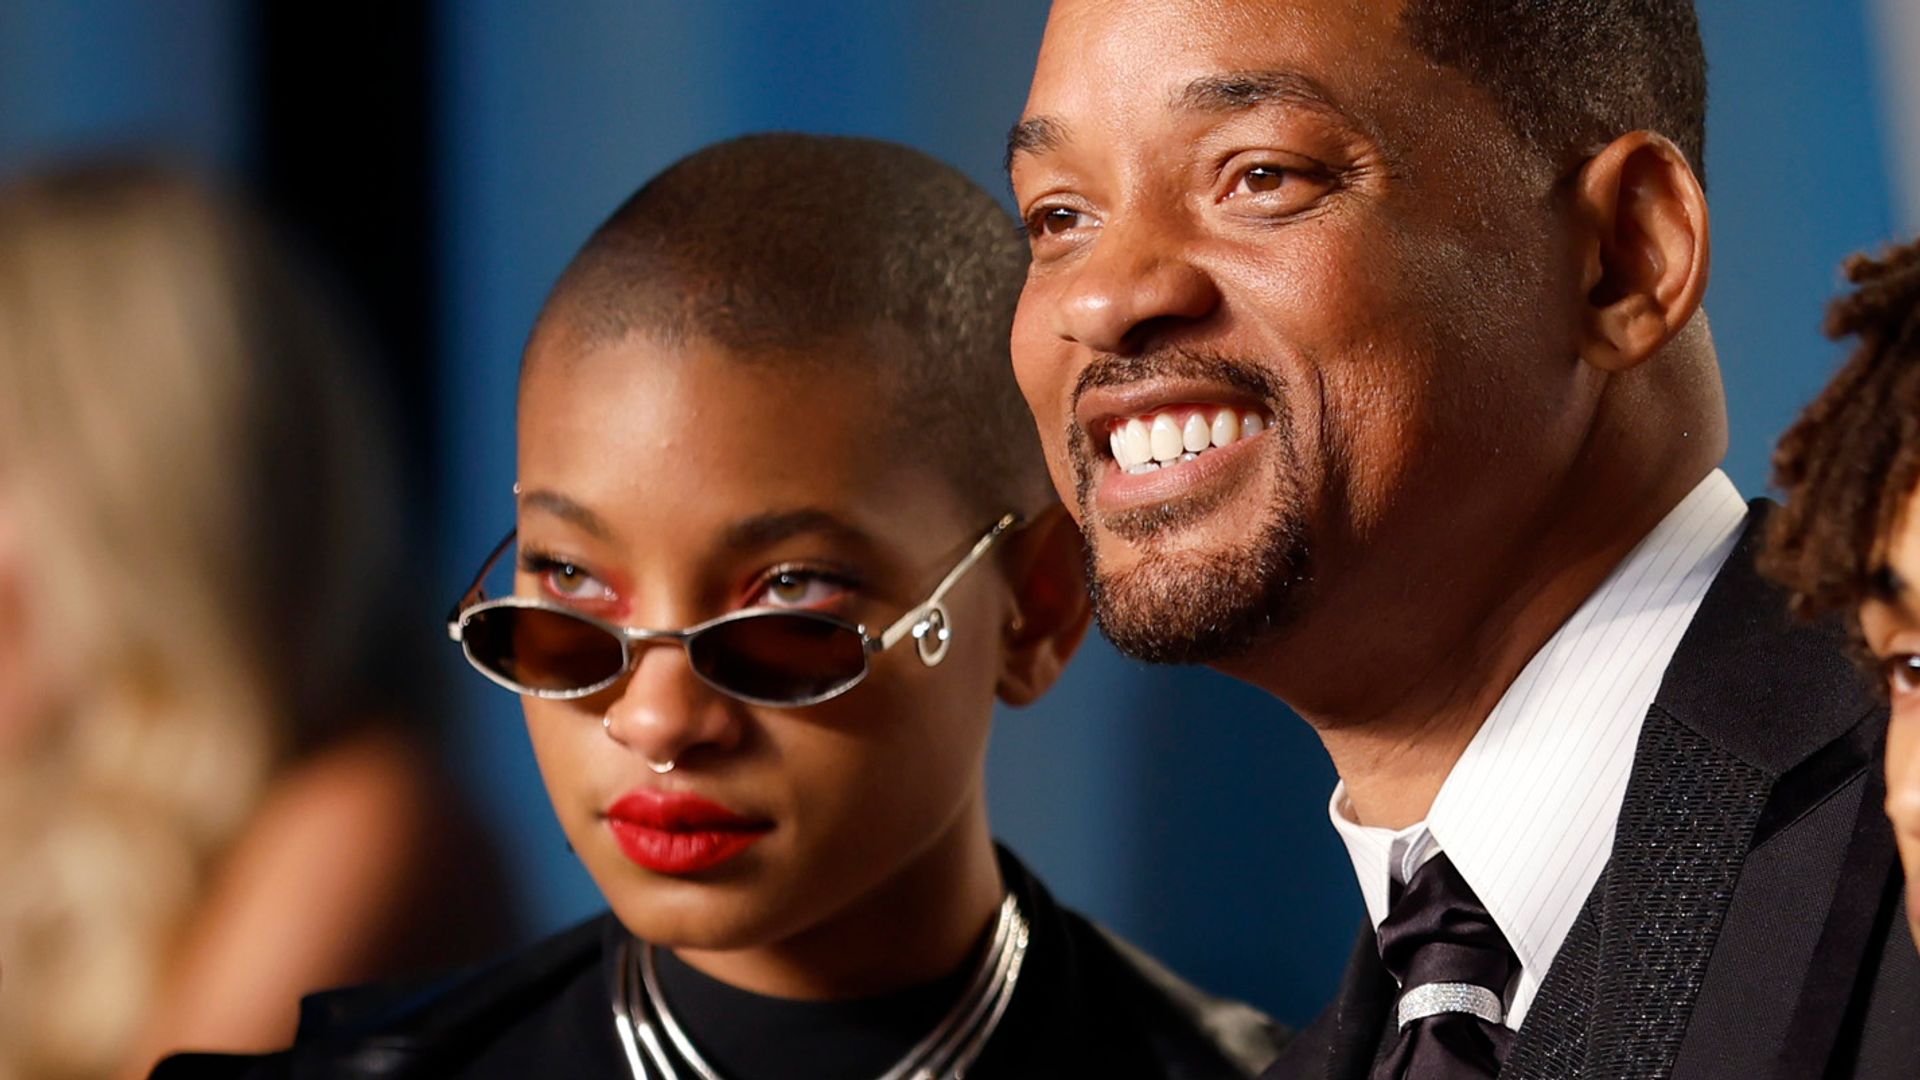 Will Smith celebrates major family 'first' for daughter Willow Smith